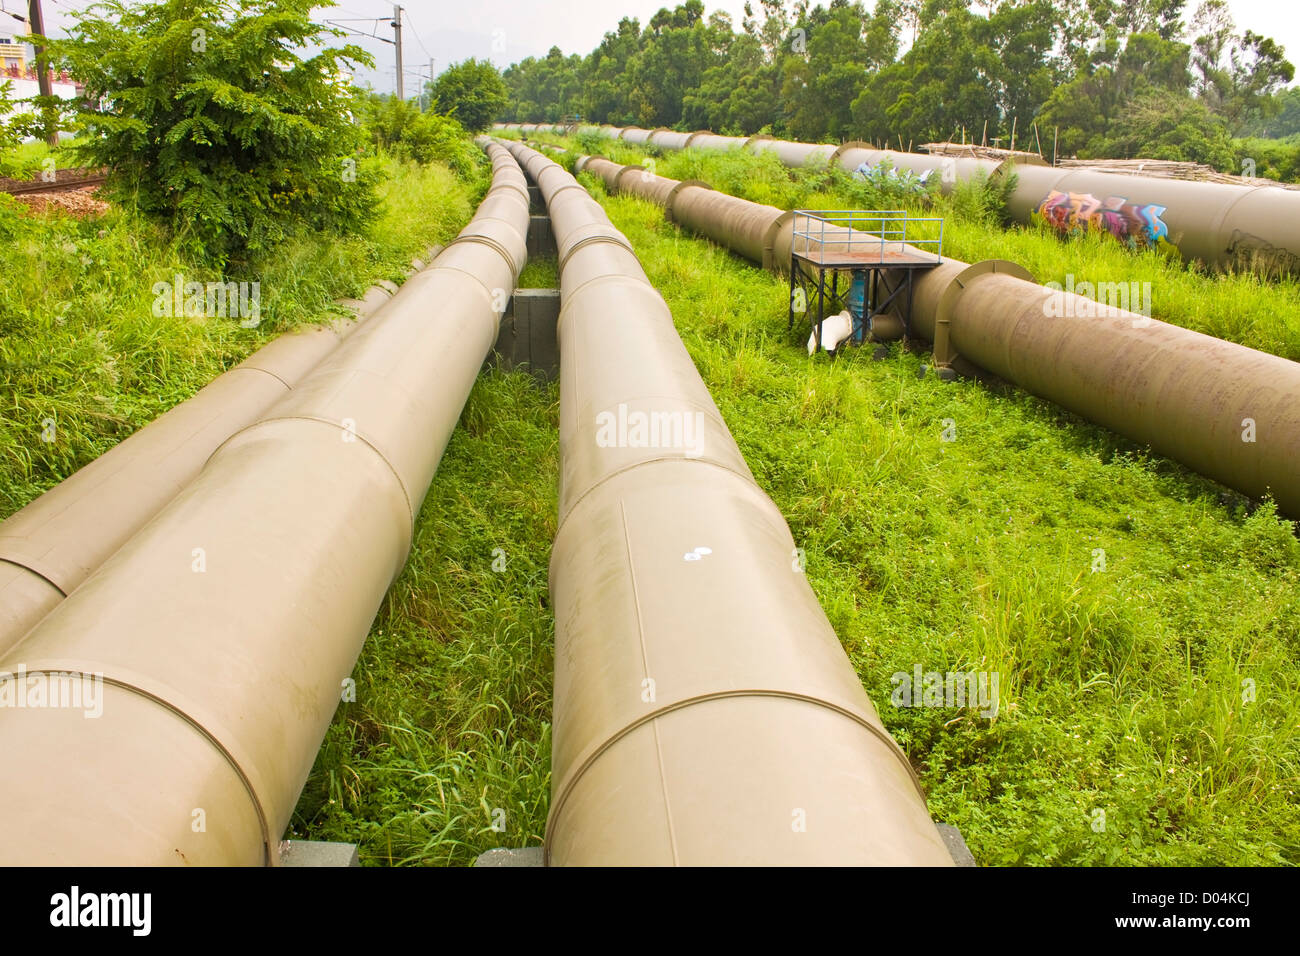 Industrial pipelines on the ground Stock Photo